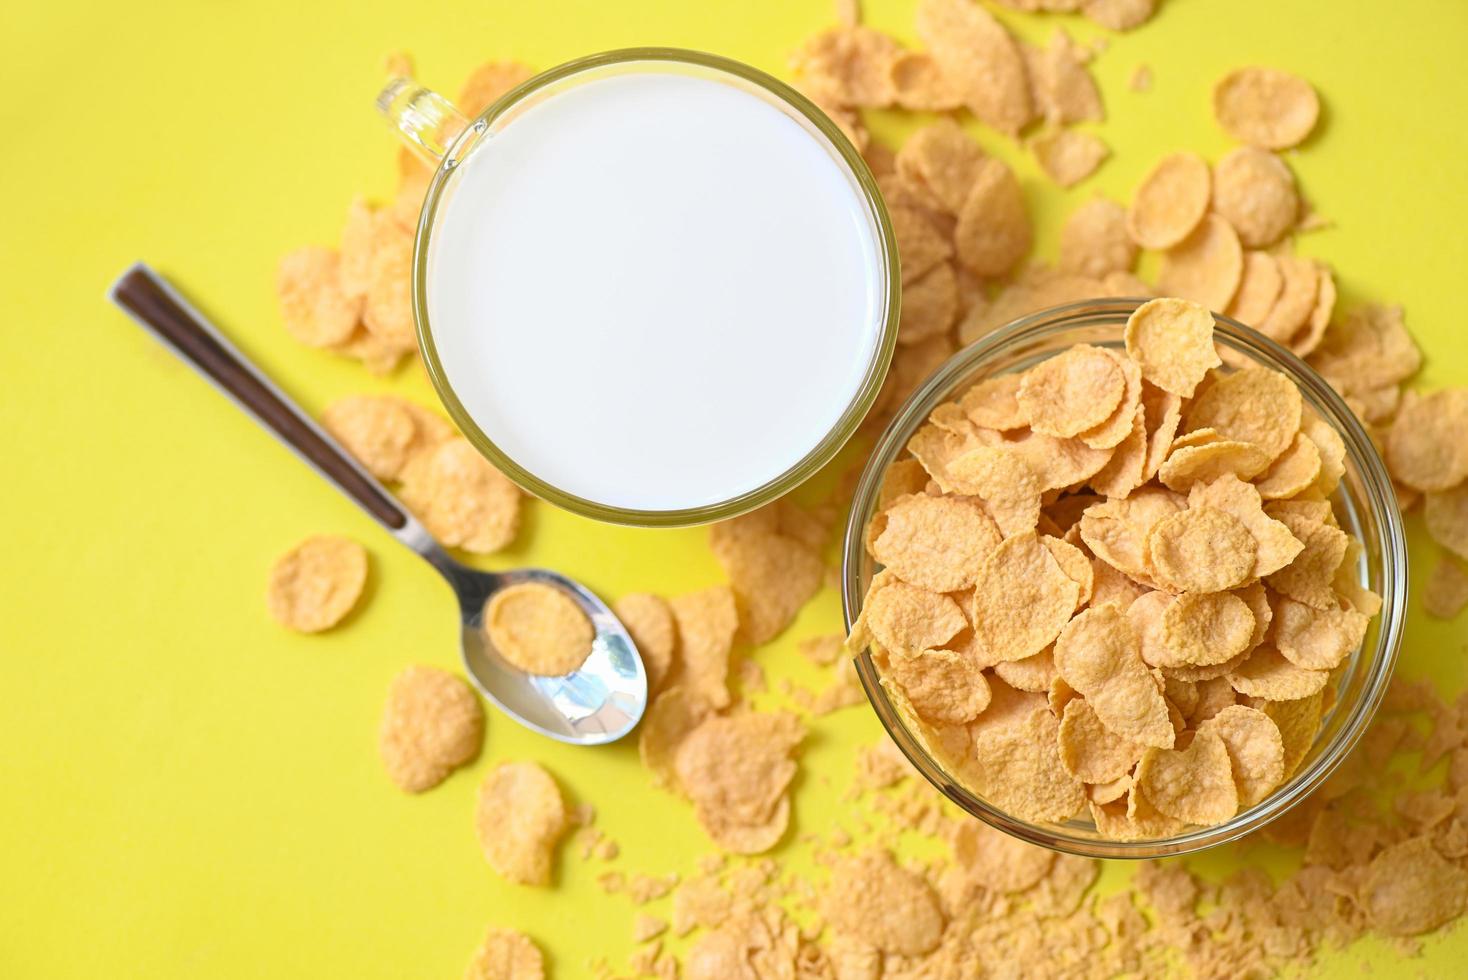 cornflakes bowl breakfast food and snack for healthy food concept, morning breakfast fresh whole grain cereal, cornflakes with milk on yellow background - top view photo